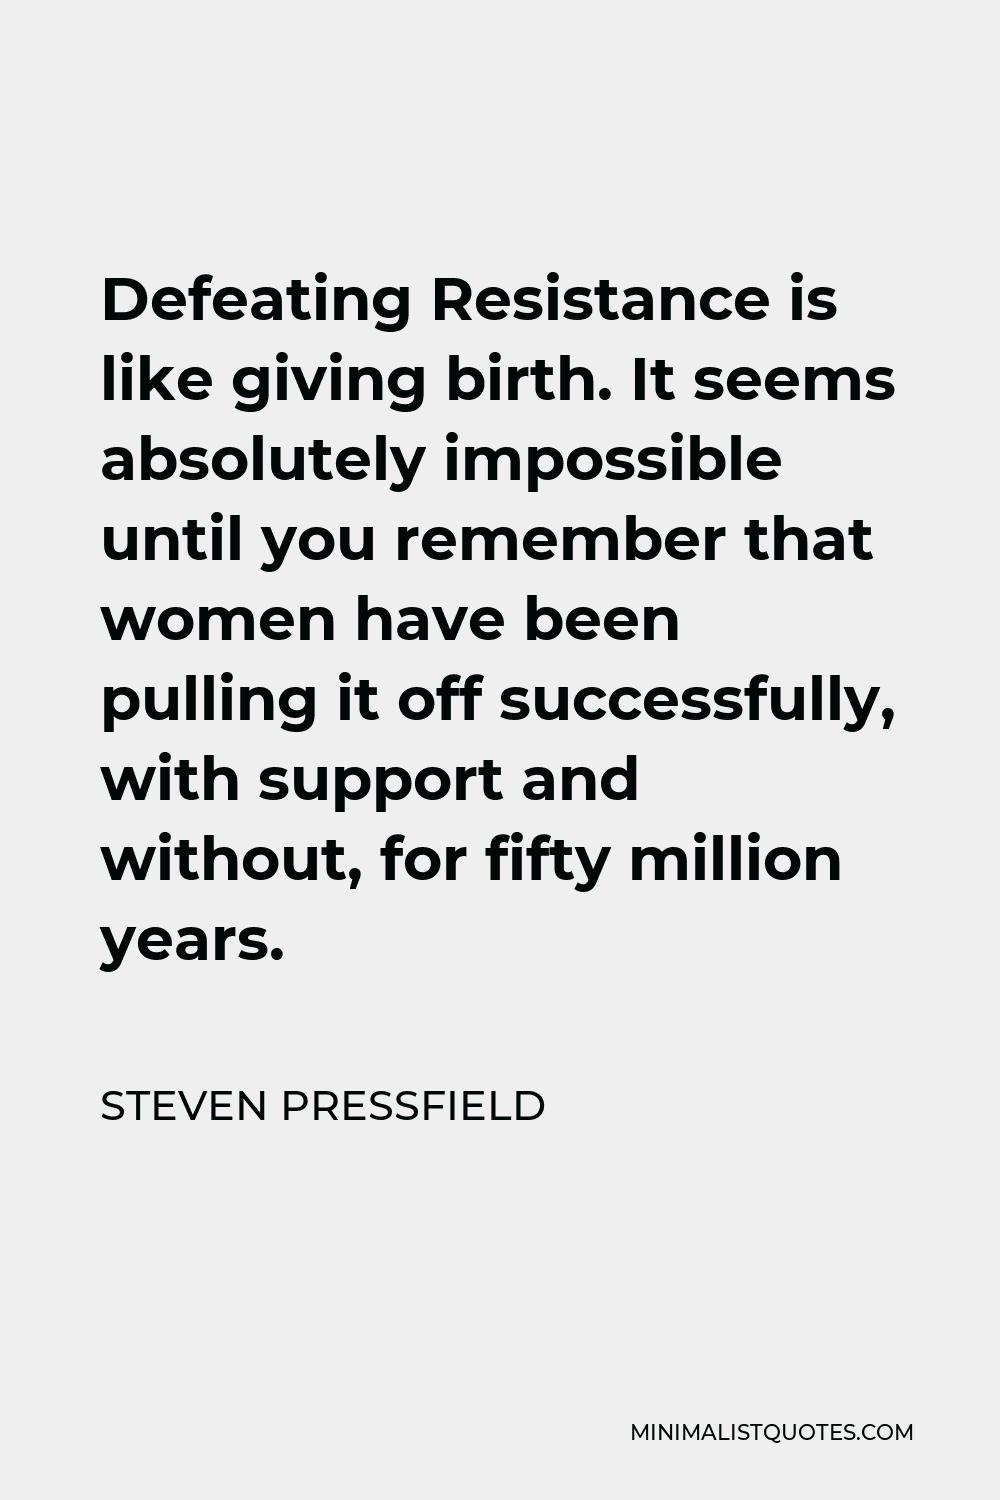 Steven Pressfield Quote - Defeating Resistance is like giving birth. It seems absolutely impossible until you remember that women have been pulling it off successfully, with support and without, for fifty million years.